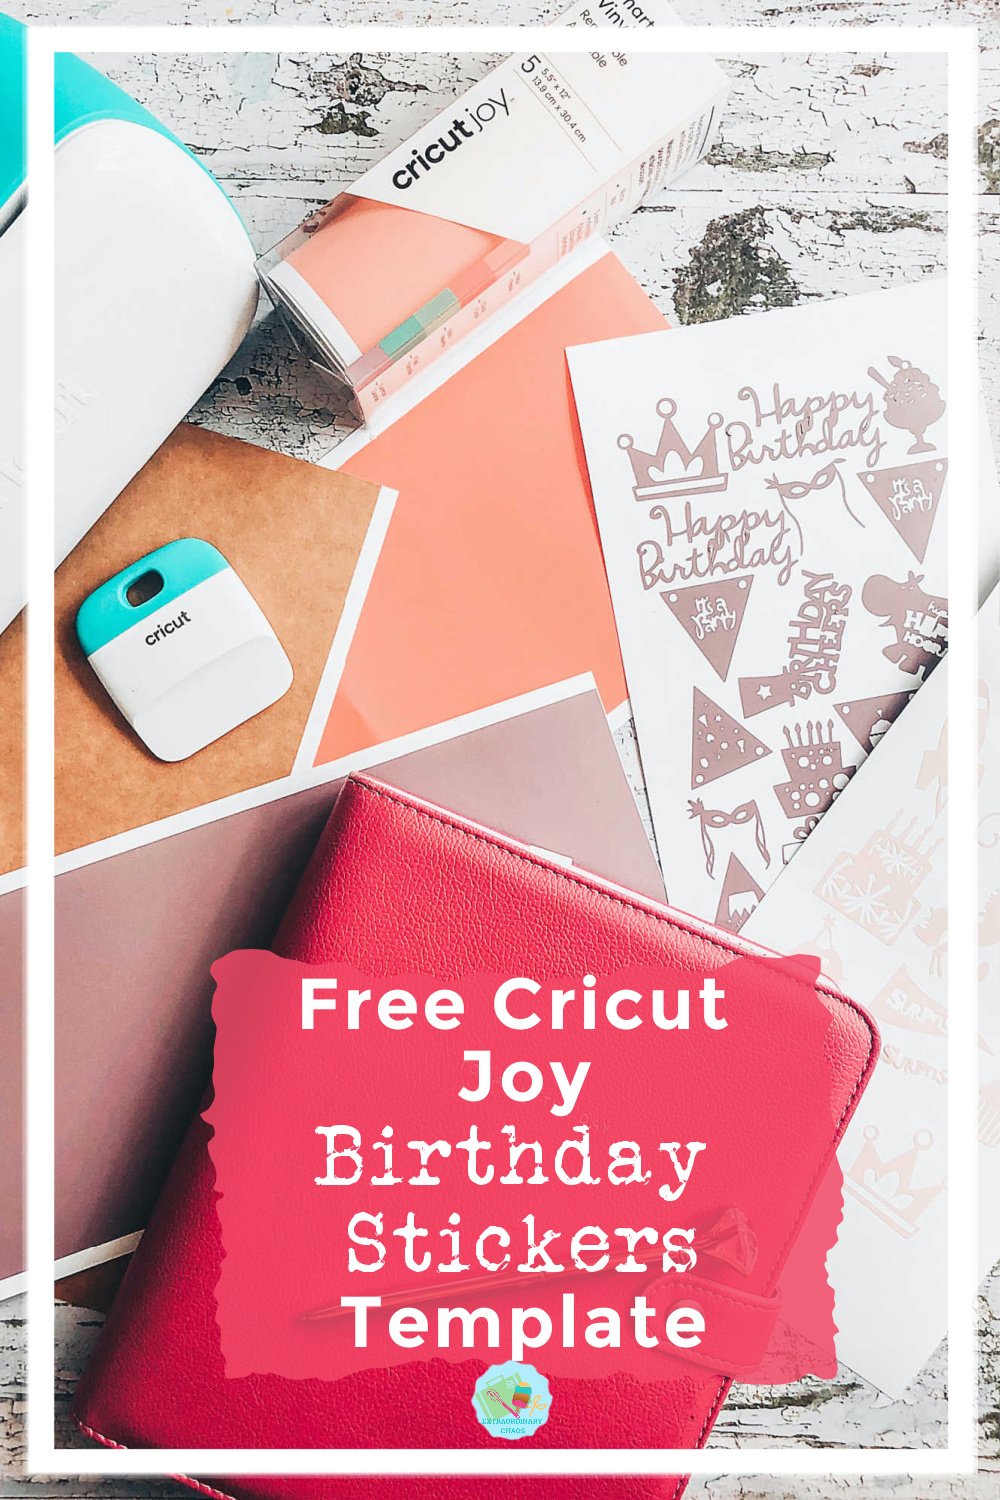  Free Cricut Joy Birthday Stickers Template for making birthday cards, scrapbooking layouts, planners, wall decals and party decorations